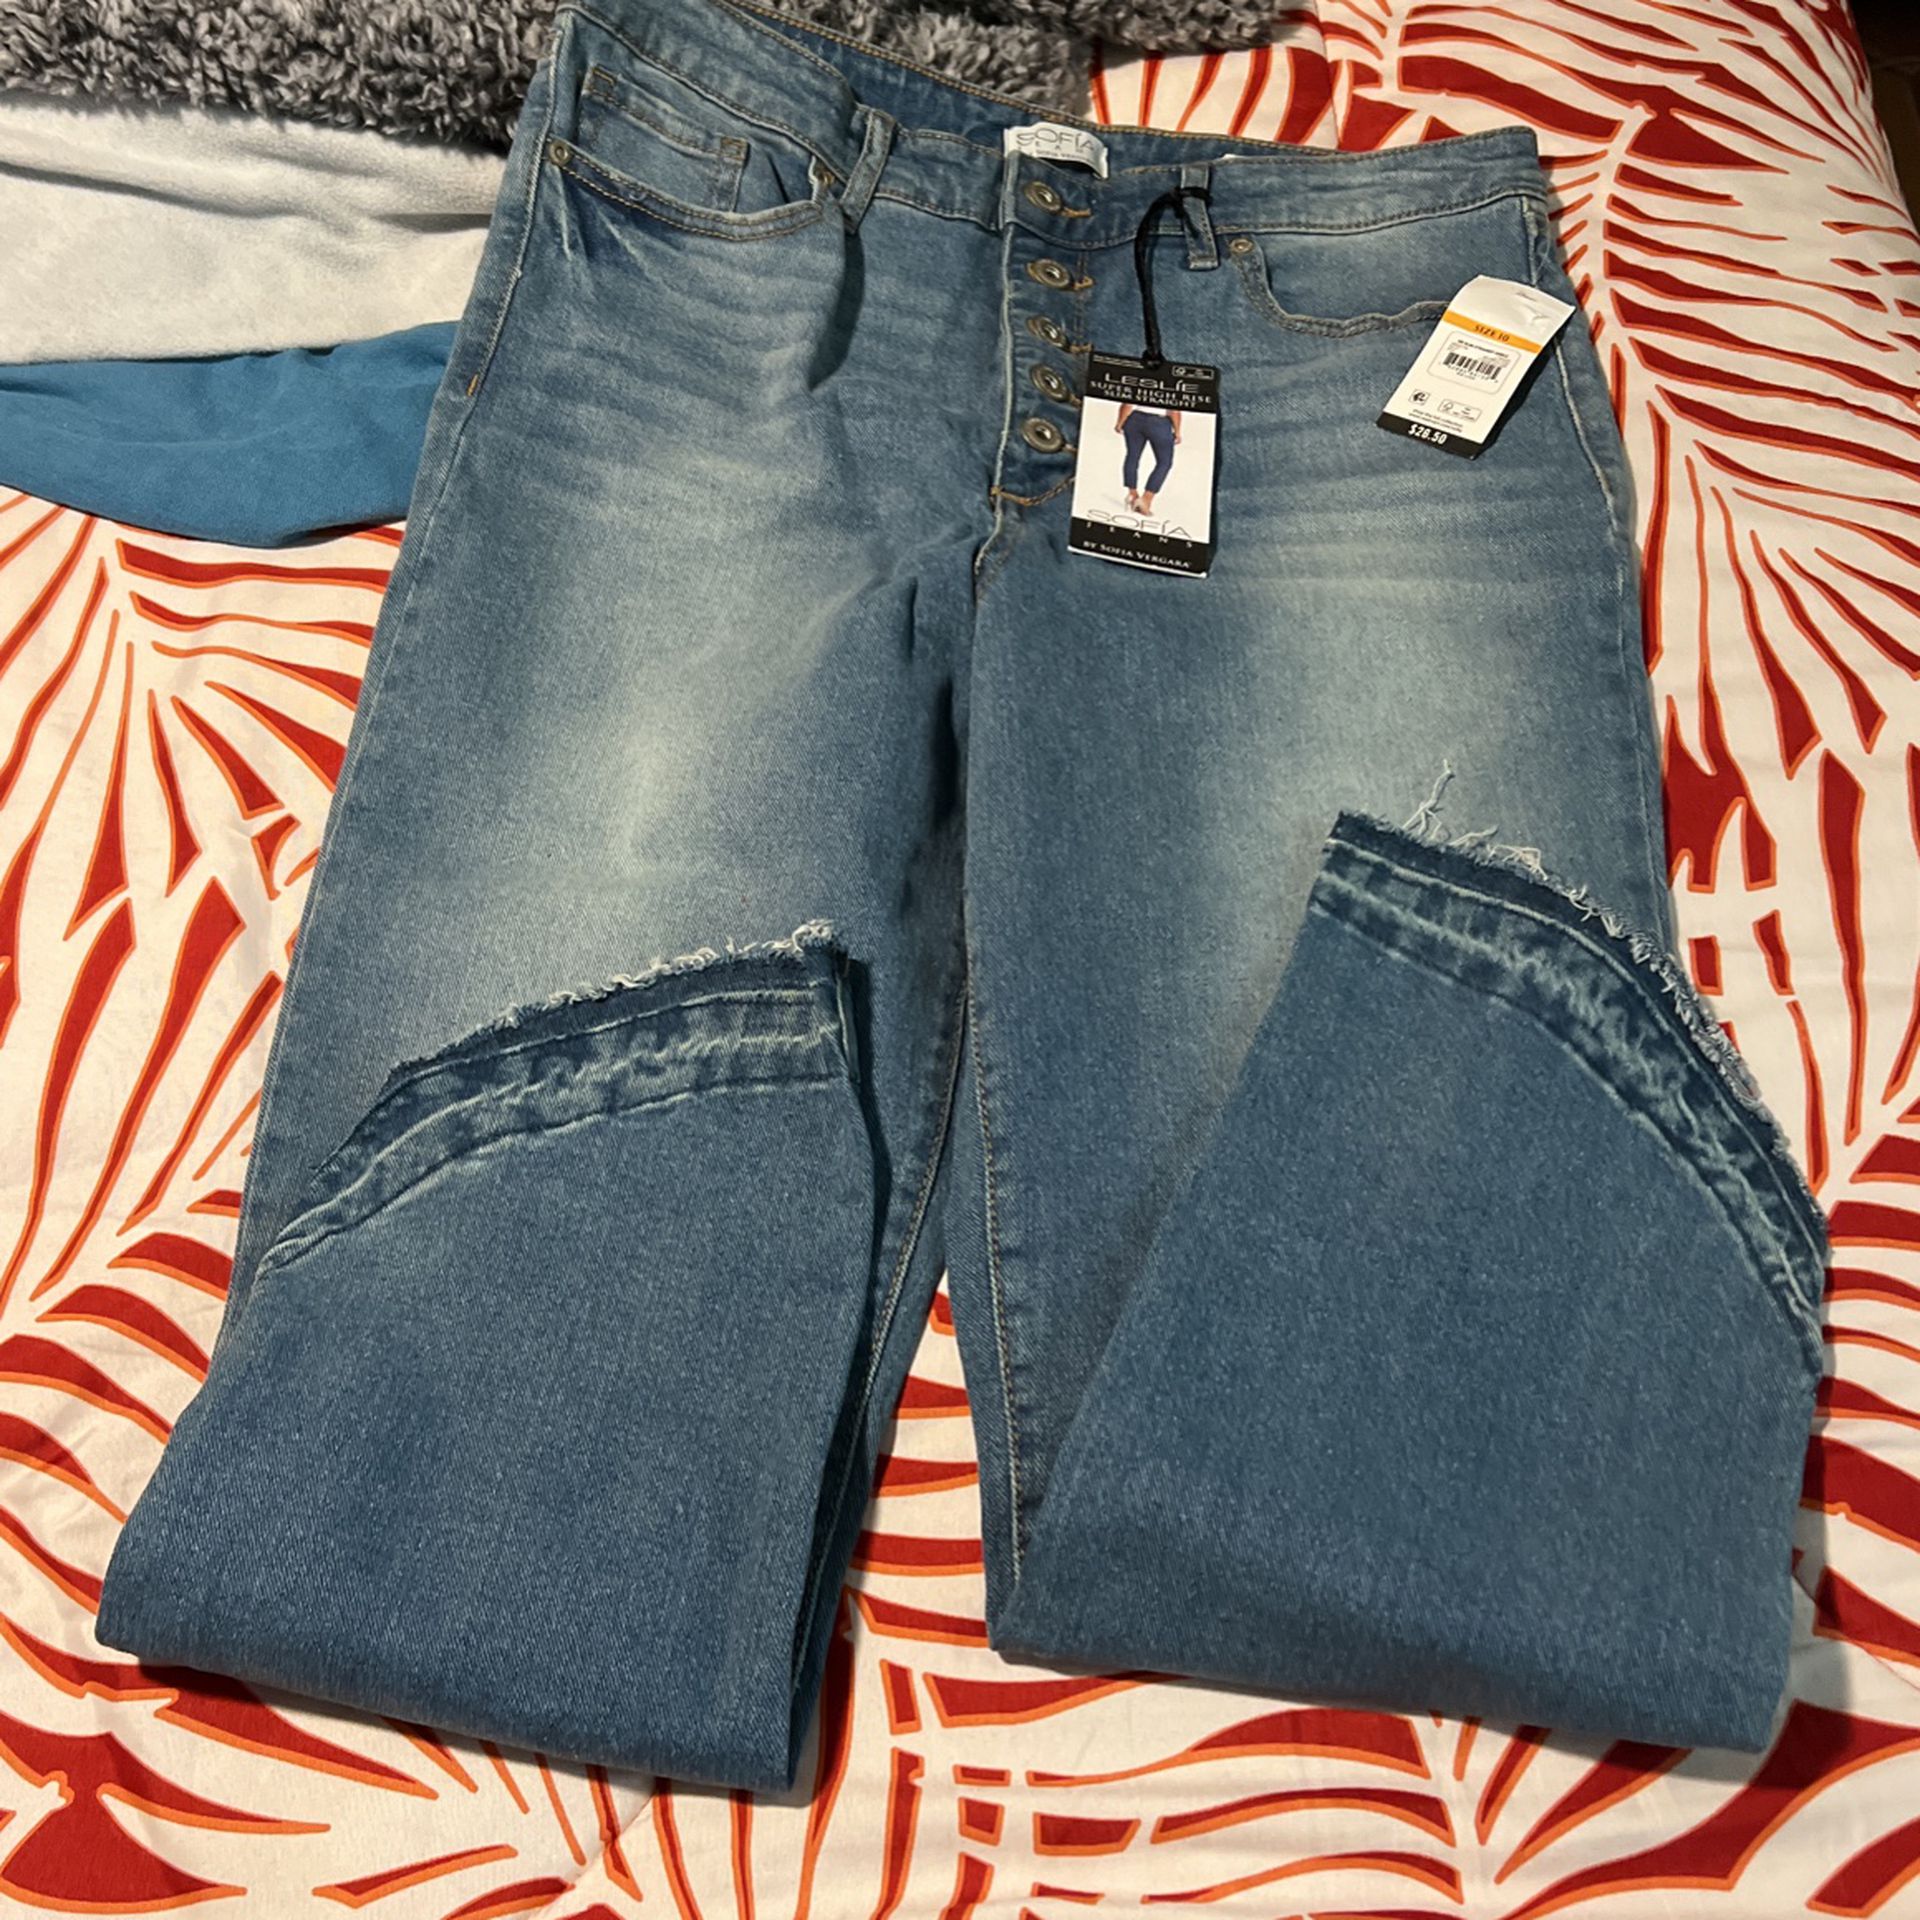 New Jeans Brand Sofia Vergara Size 10 $10 for Sale in Jurupa Valley, CA -  OfferUp